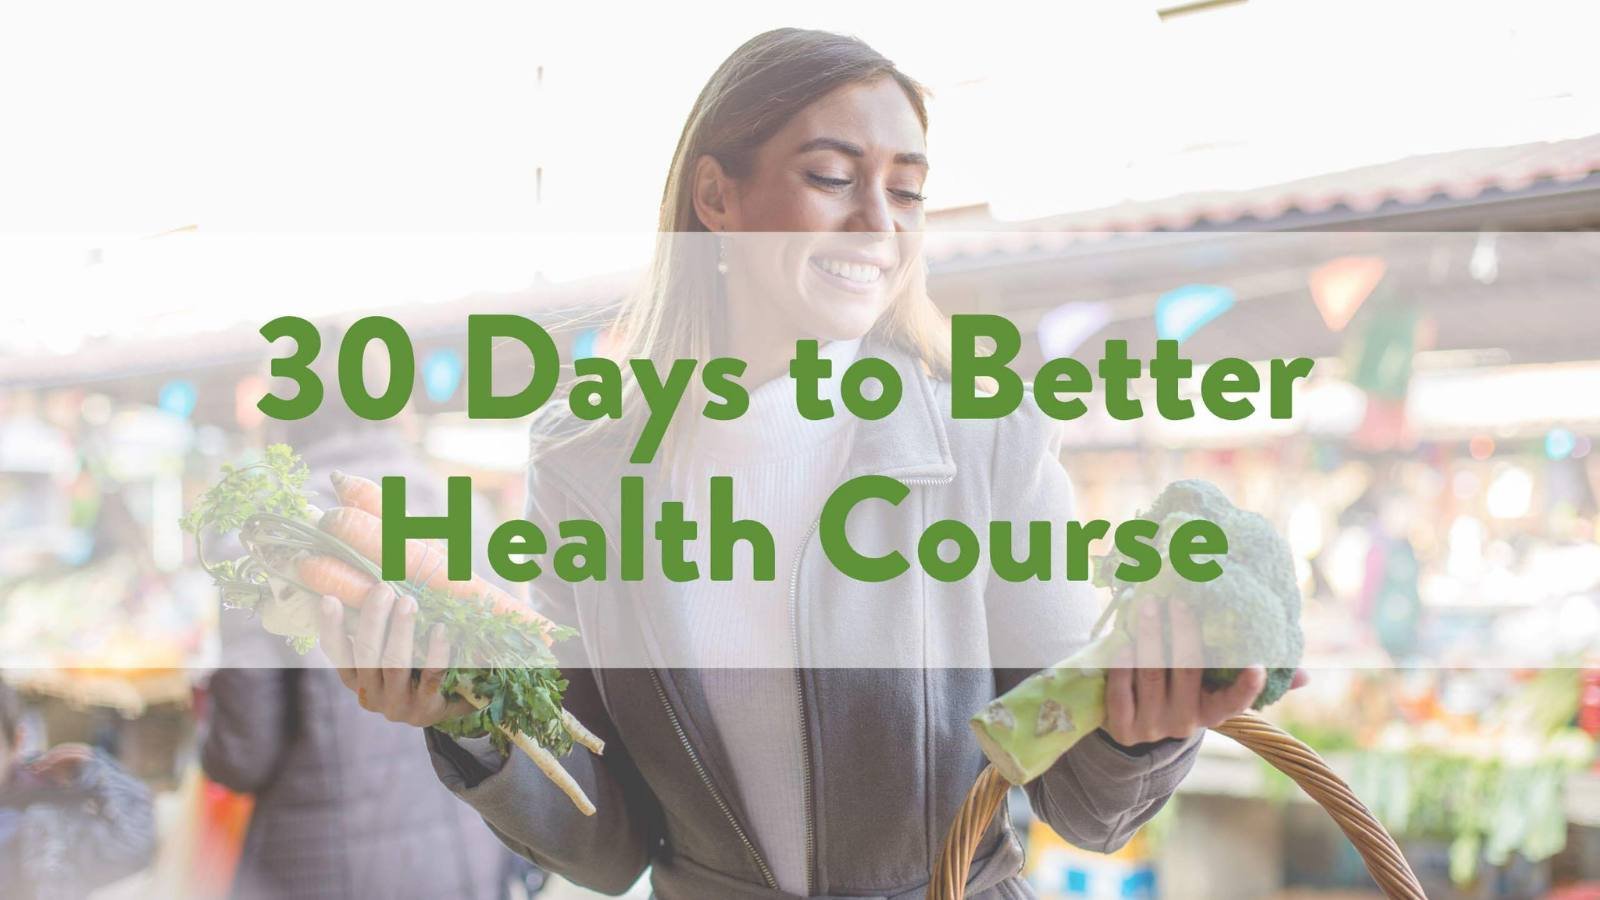 Yummy Doctor Holistic Health Education - 30 Days to Better Health Course - Wide